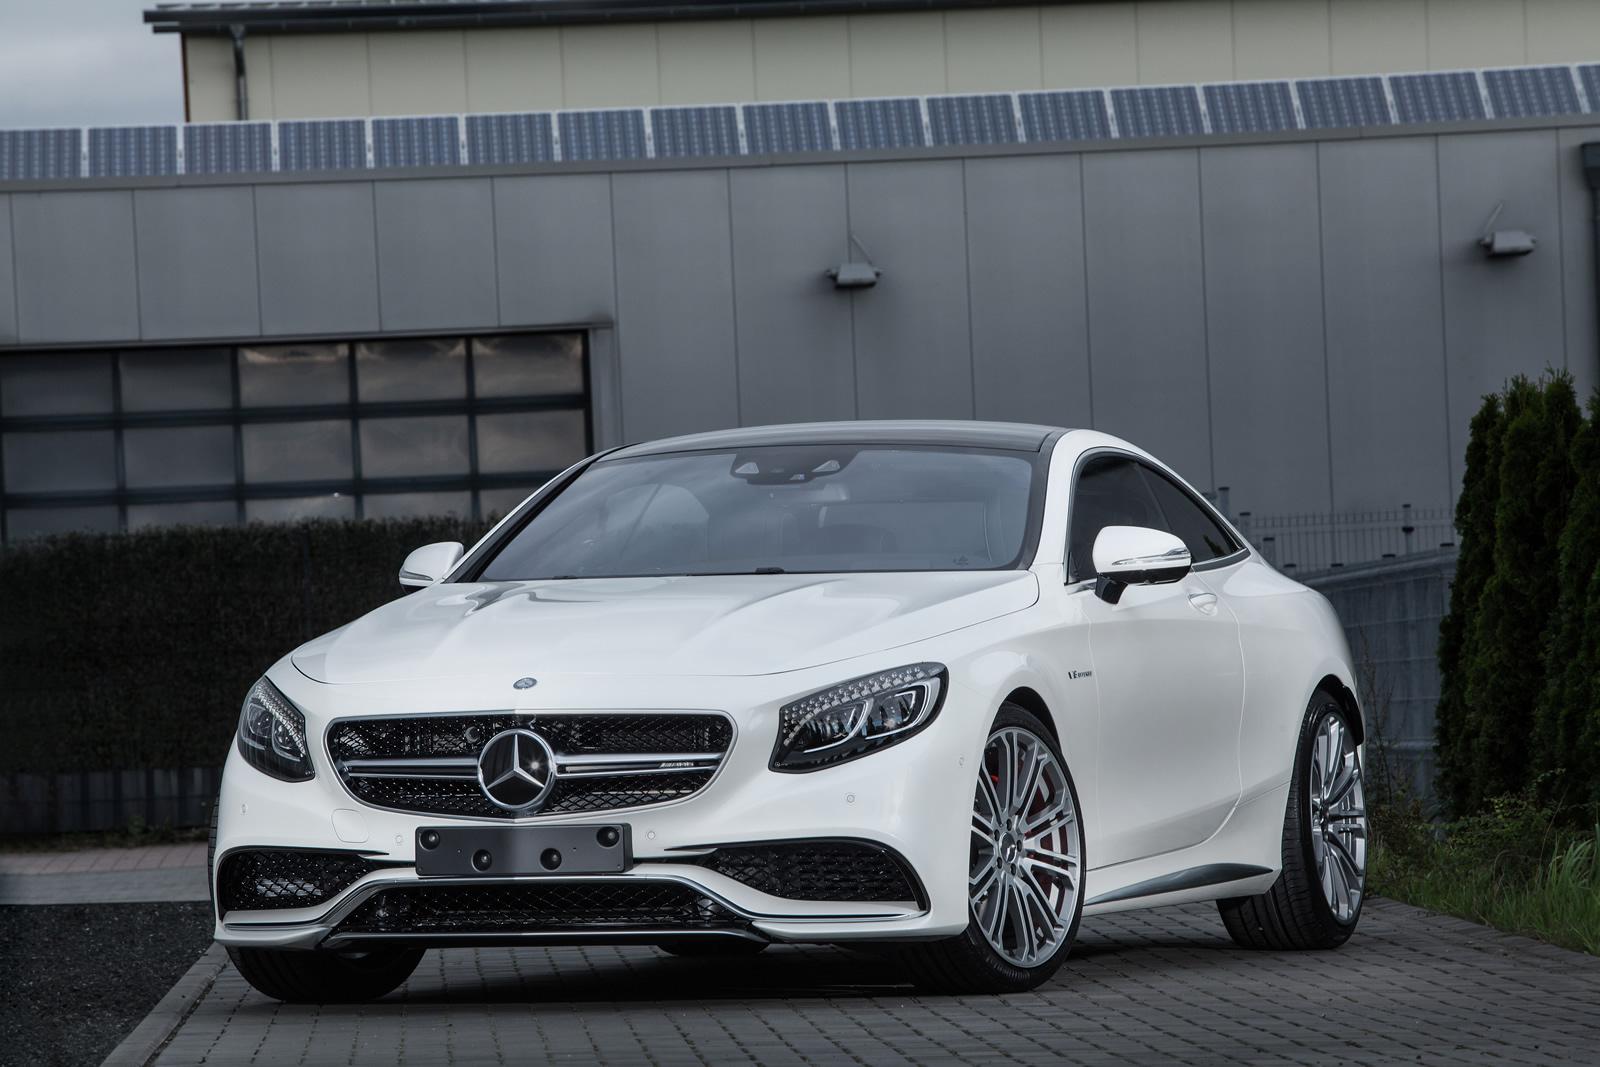 Mercedes-Benz S63 AMG 4MATIC Coupe by IMSA